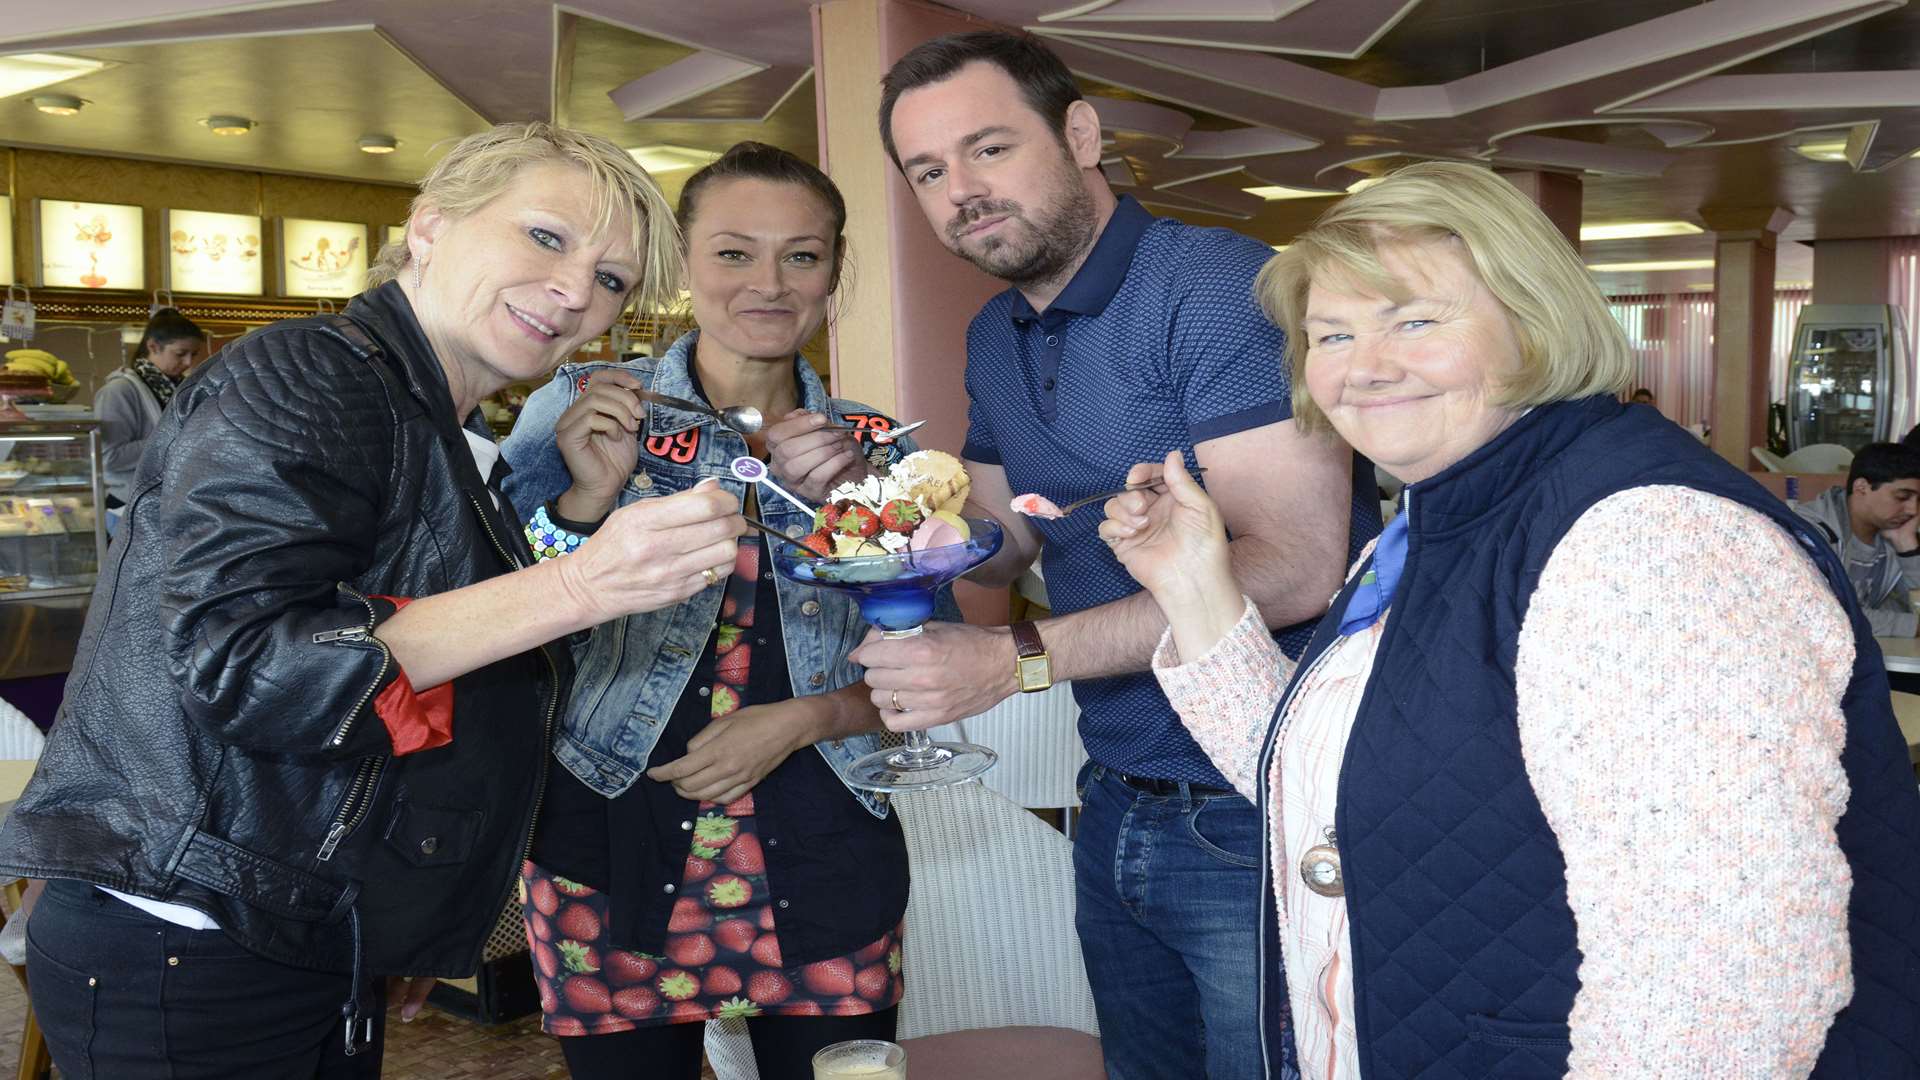 EastEnders cast in Morelli's ice cream parlour in Broadstairs.